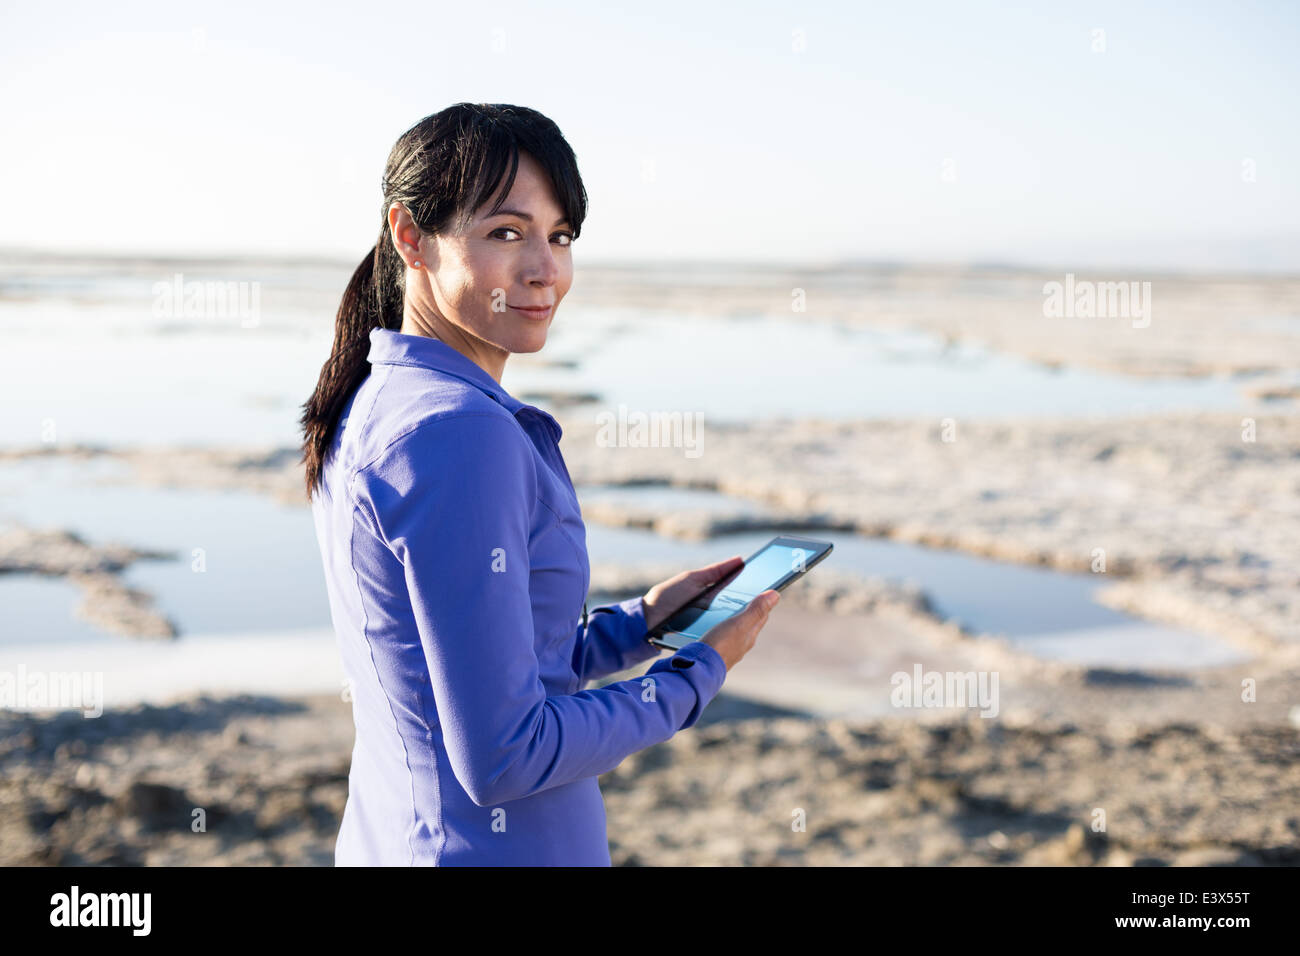 Sporty fortysomething woman in purple smiling over her shoulder using smalll tablet device as a camera outdoors. Stock Photo